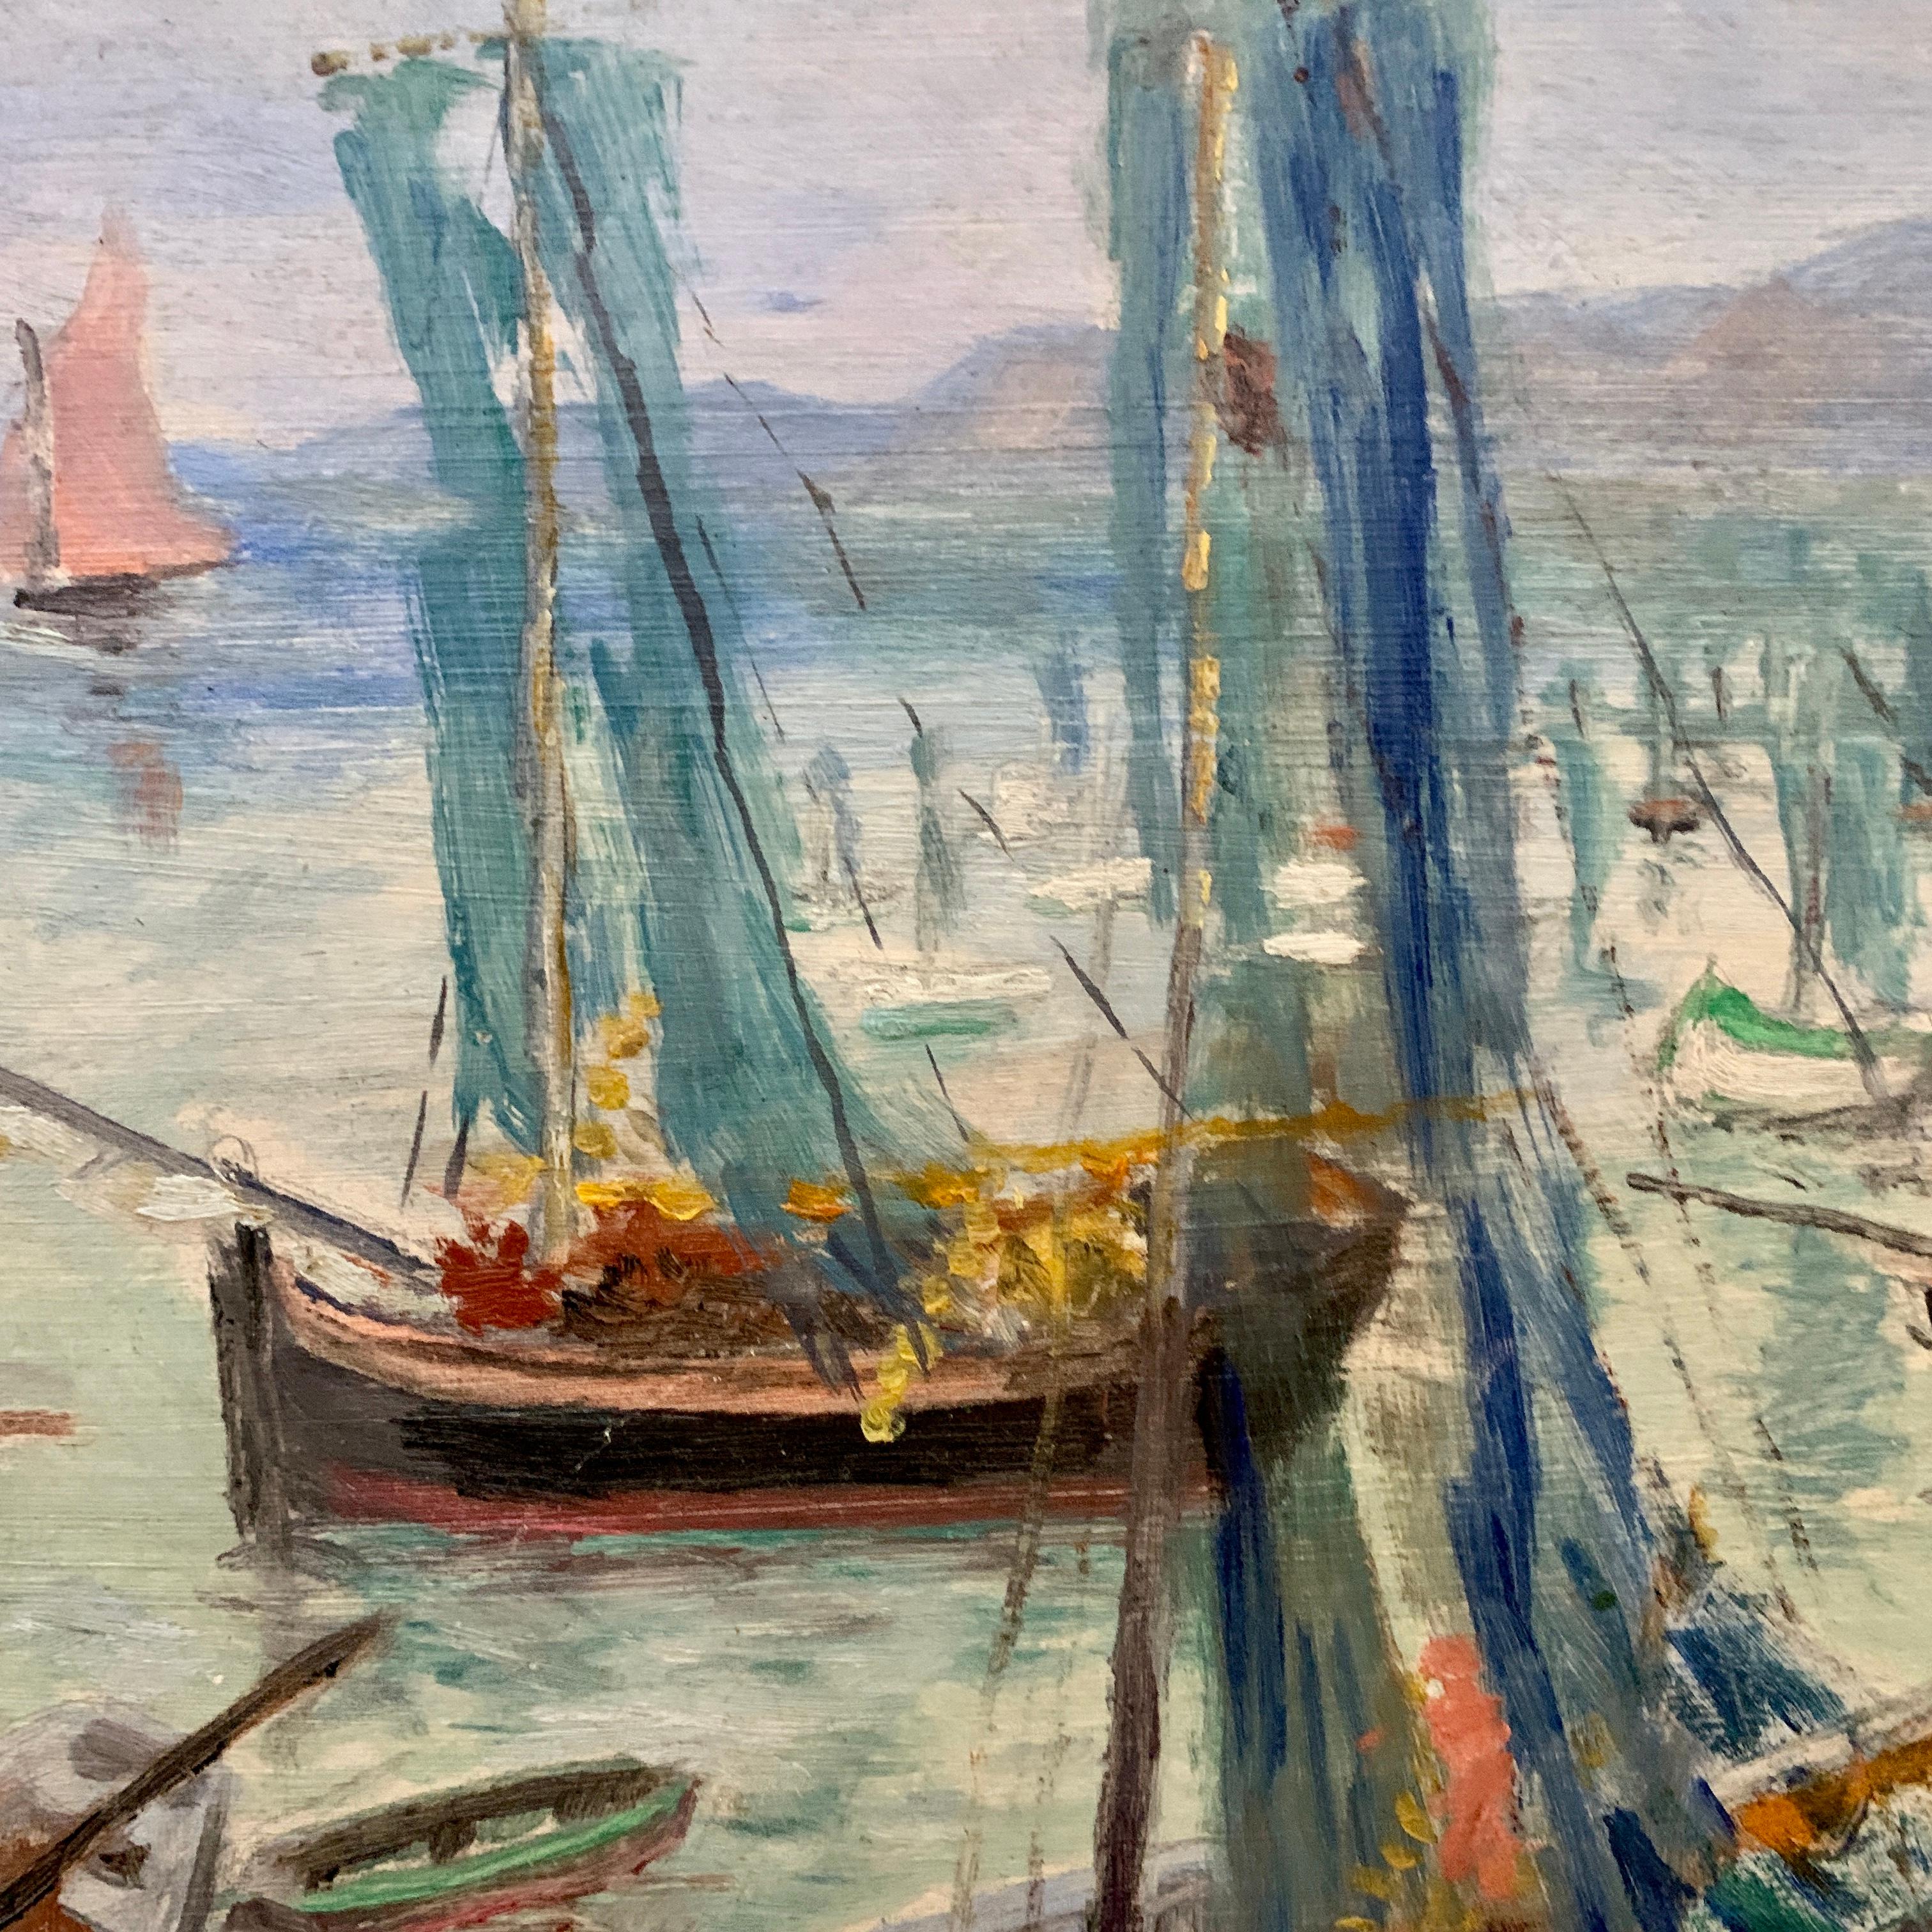 French 20th century Impressionist harbor, with fishing boats at sea, landscape - Painting by H.Gaultier